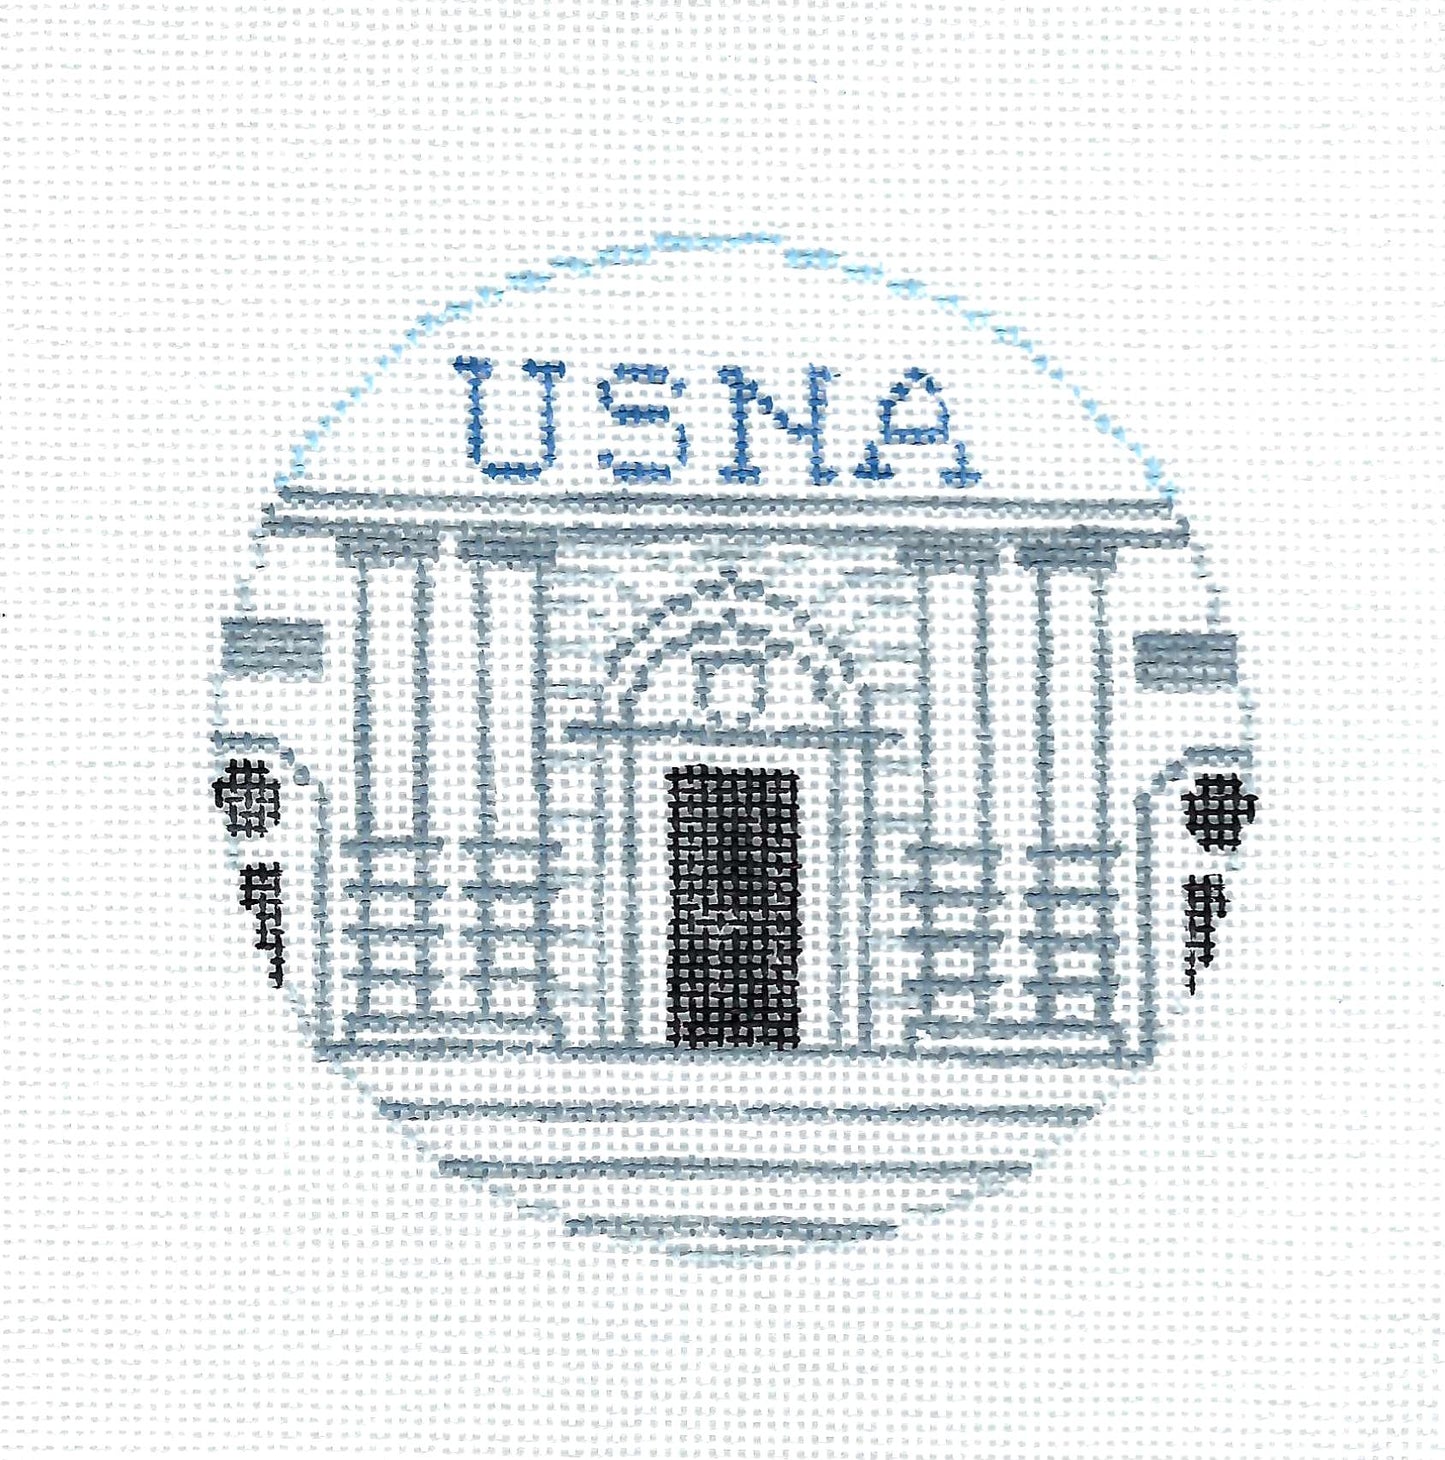 Military Round ~ US NAVAL ACADEMY, ANNAPOLIS, MARYLAND Military handpainted Needlepoint Canvas by Kathy Schenkel